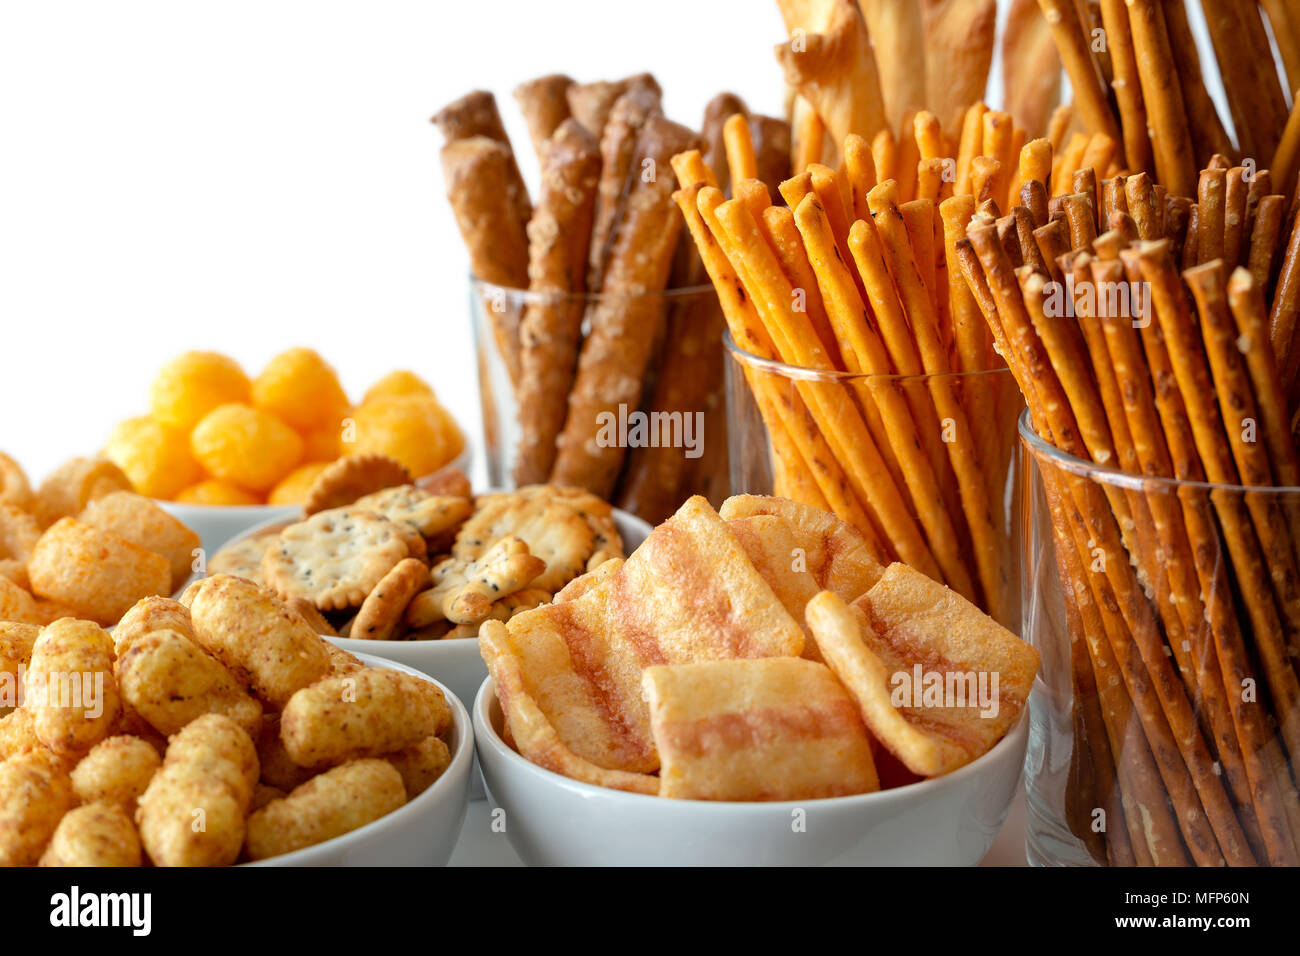 Selection of many types of savory snacks in white ceramic dishes and glasses. Stock Photo